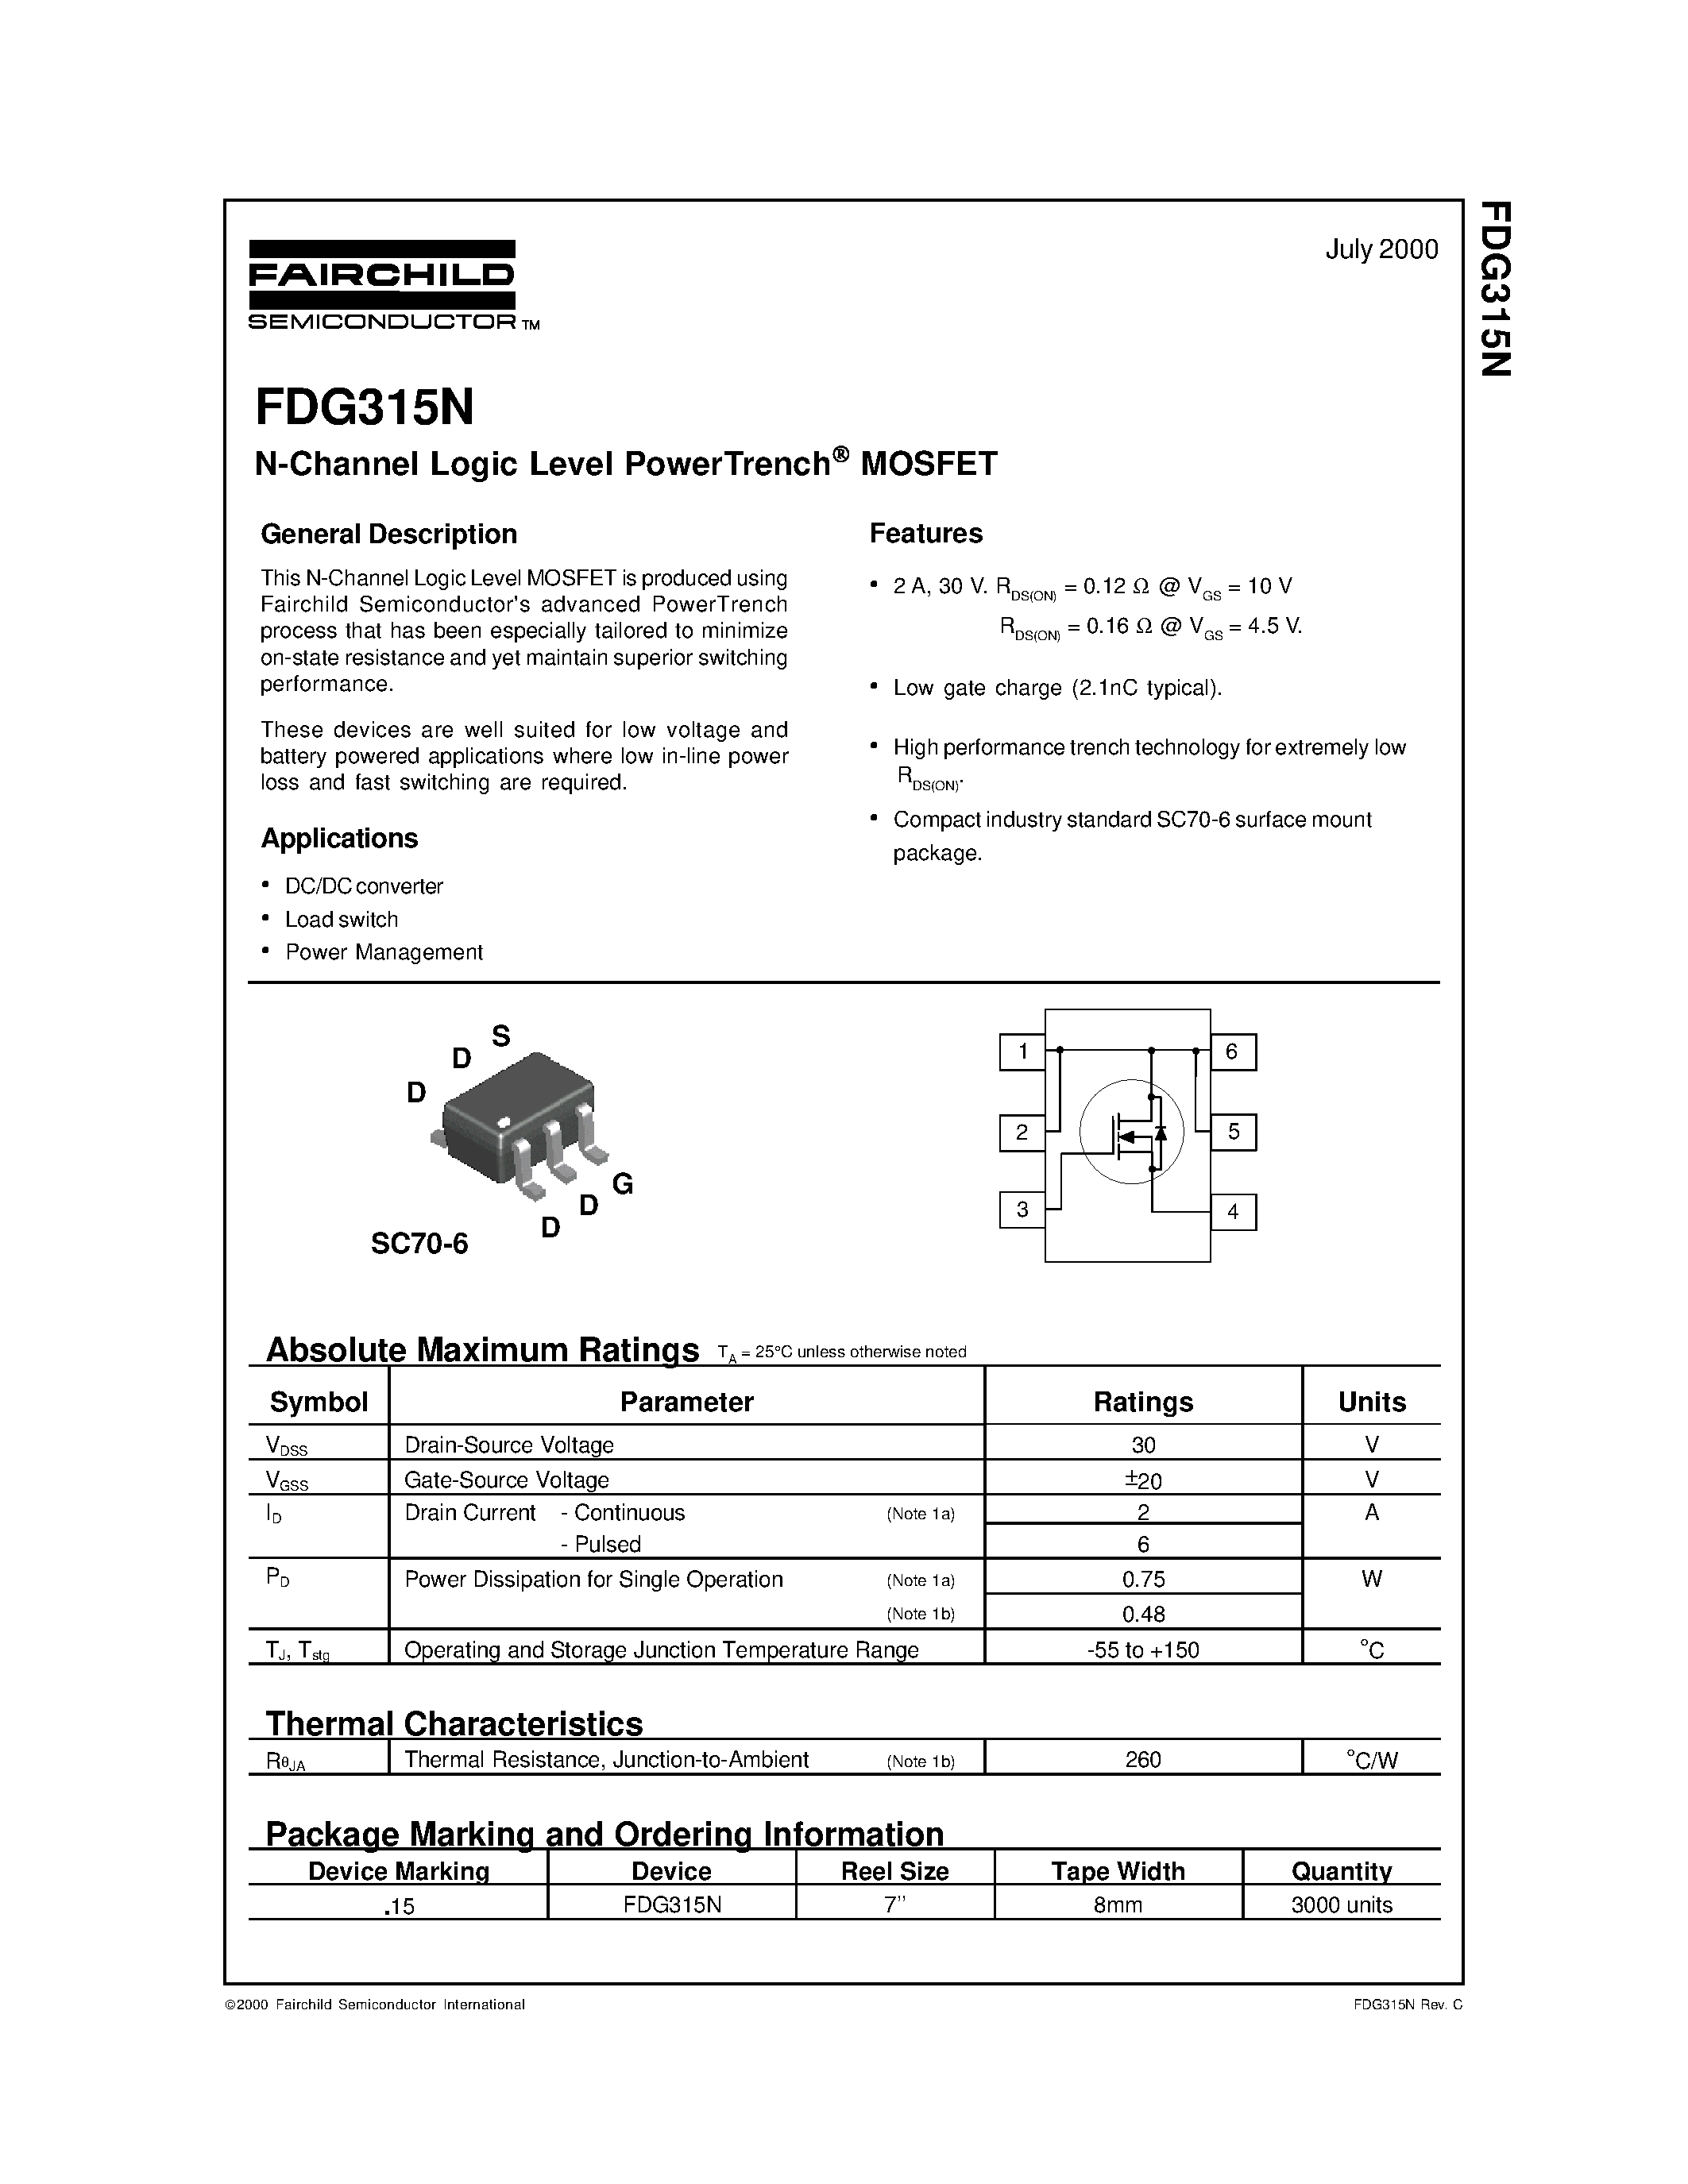 Даташит FDG315 - N-Channel Logic Level PowerTrench MOSFET страница 1